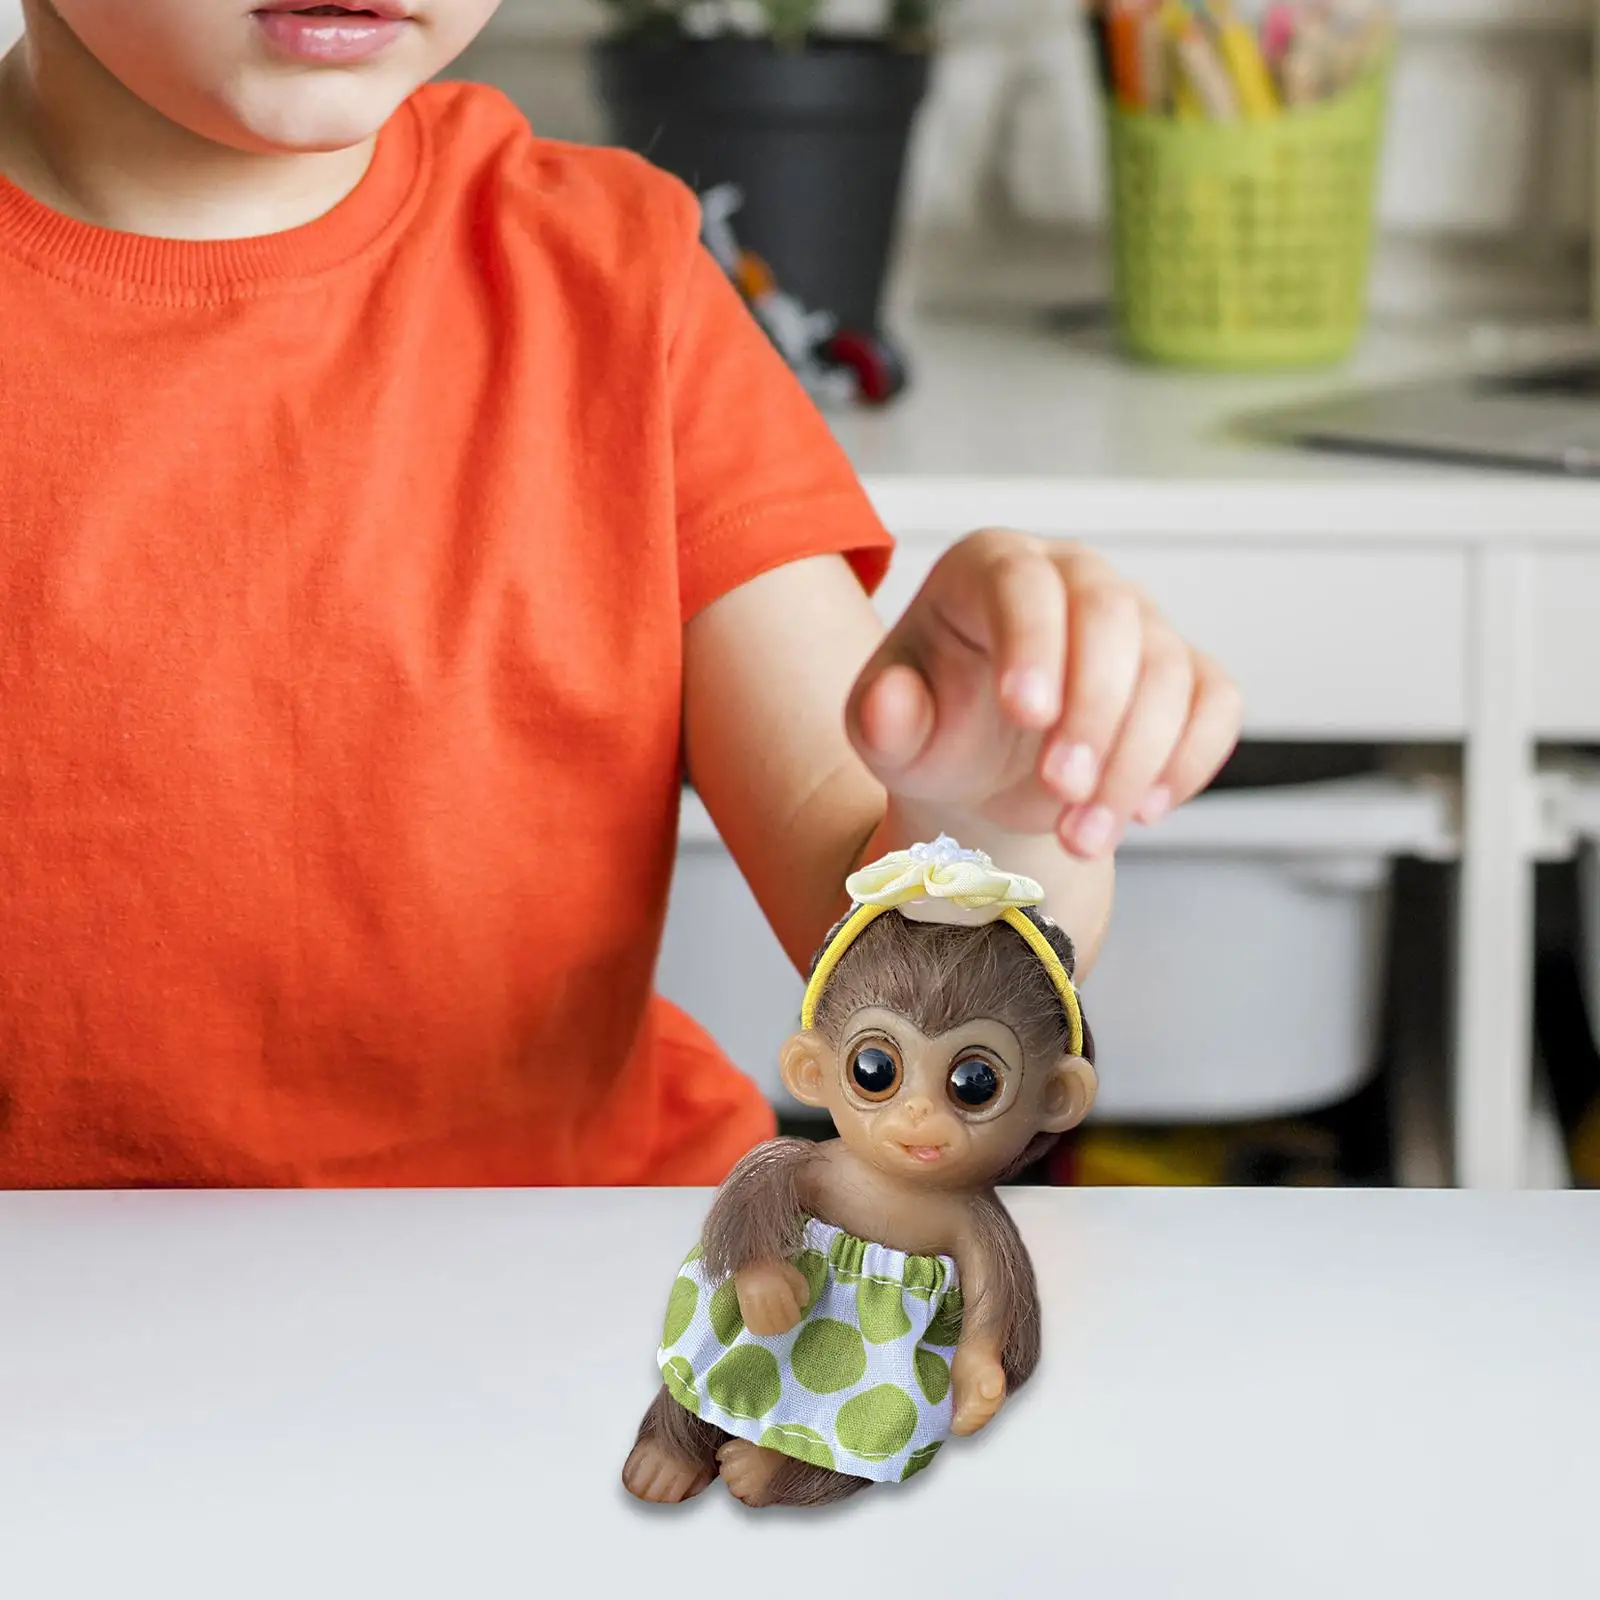 6in Full Body Silicone Monkey Home Decoration Soft Toys Baby Doll Waterproof for Girls Boys Children Kids Toddlers Gifts